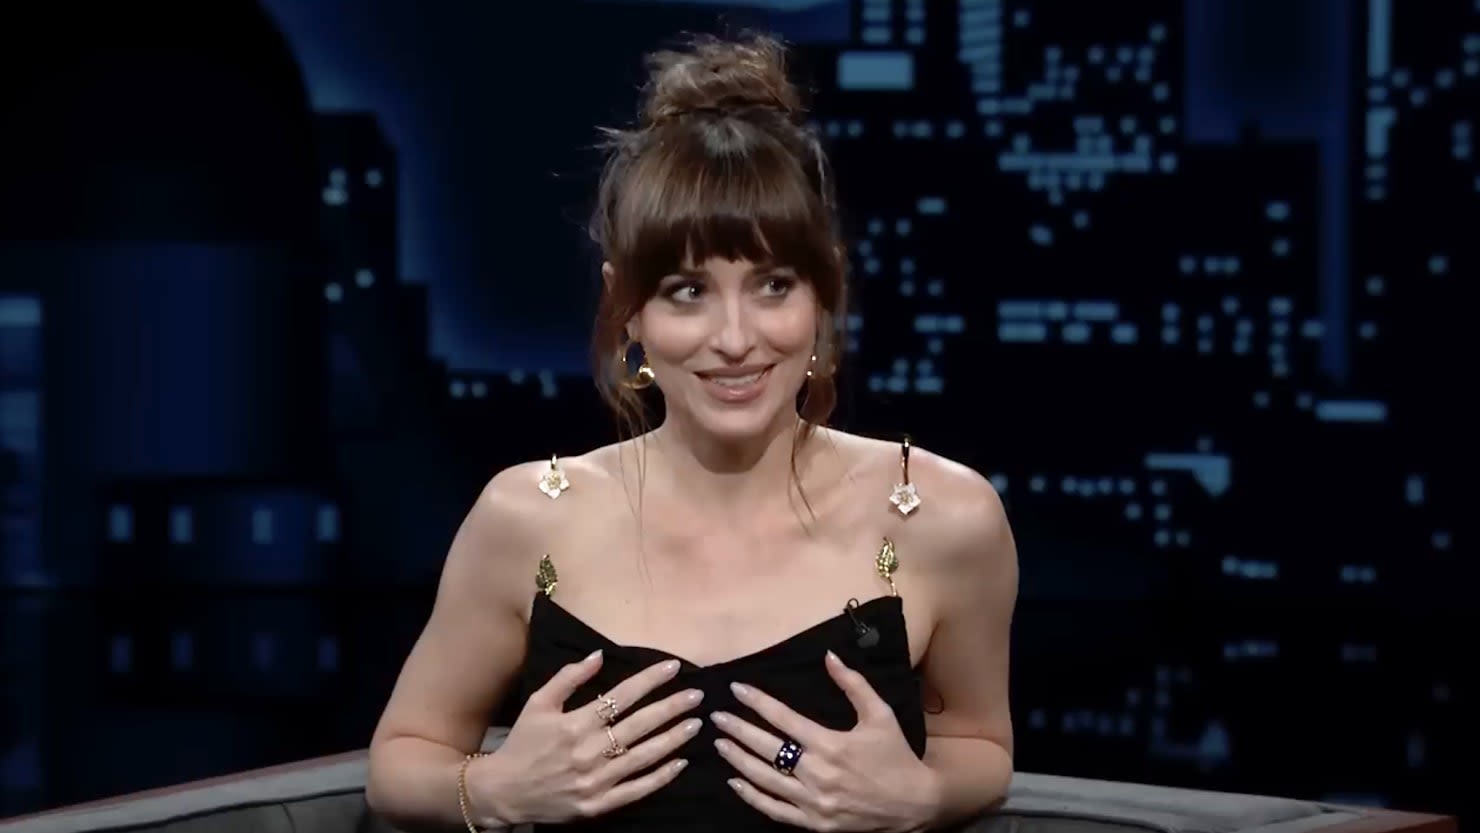 Dakota Johnson Tells ‘D*ck Pic’ Story While Trying To Hold Her Dress Up